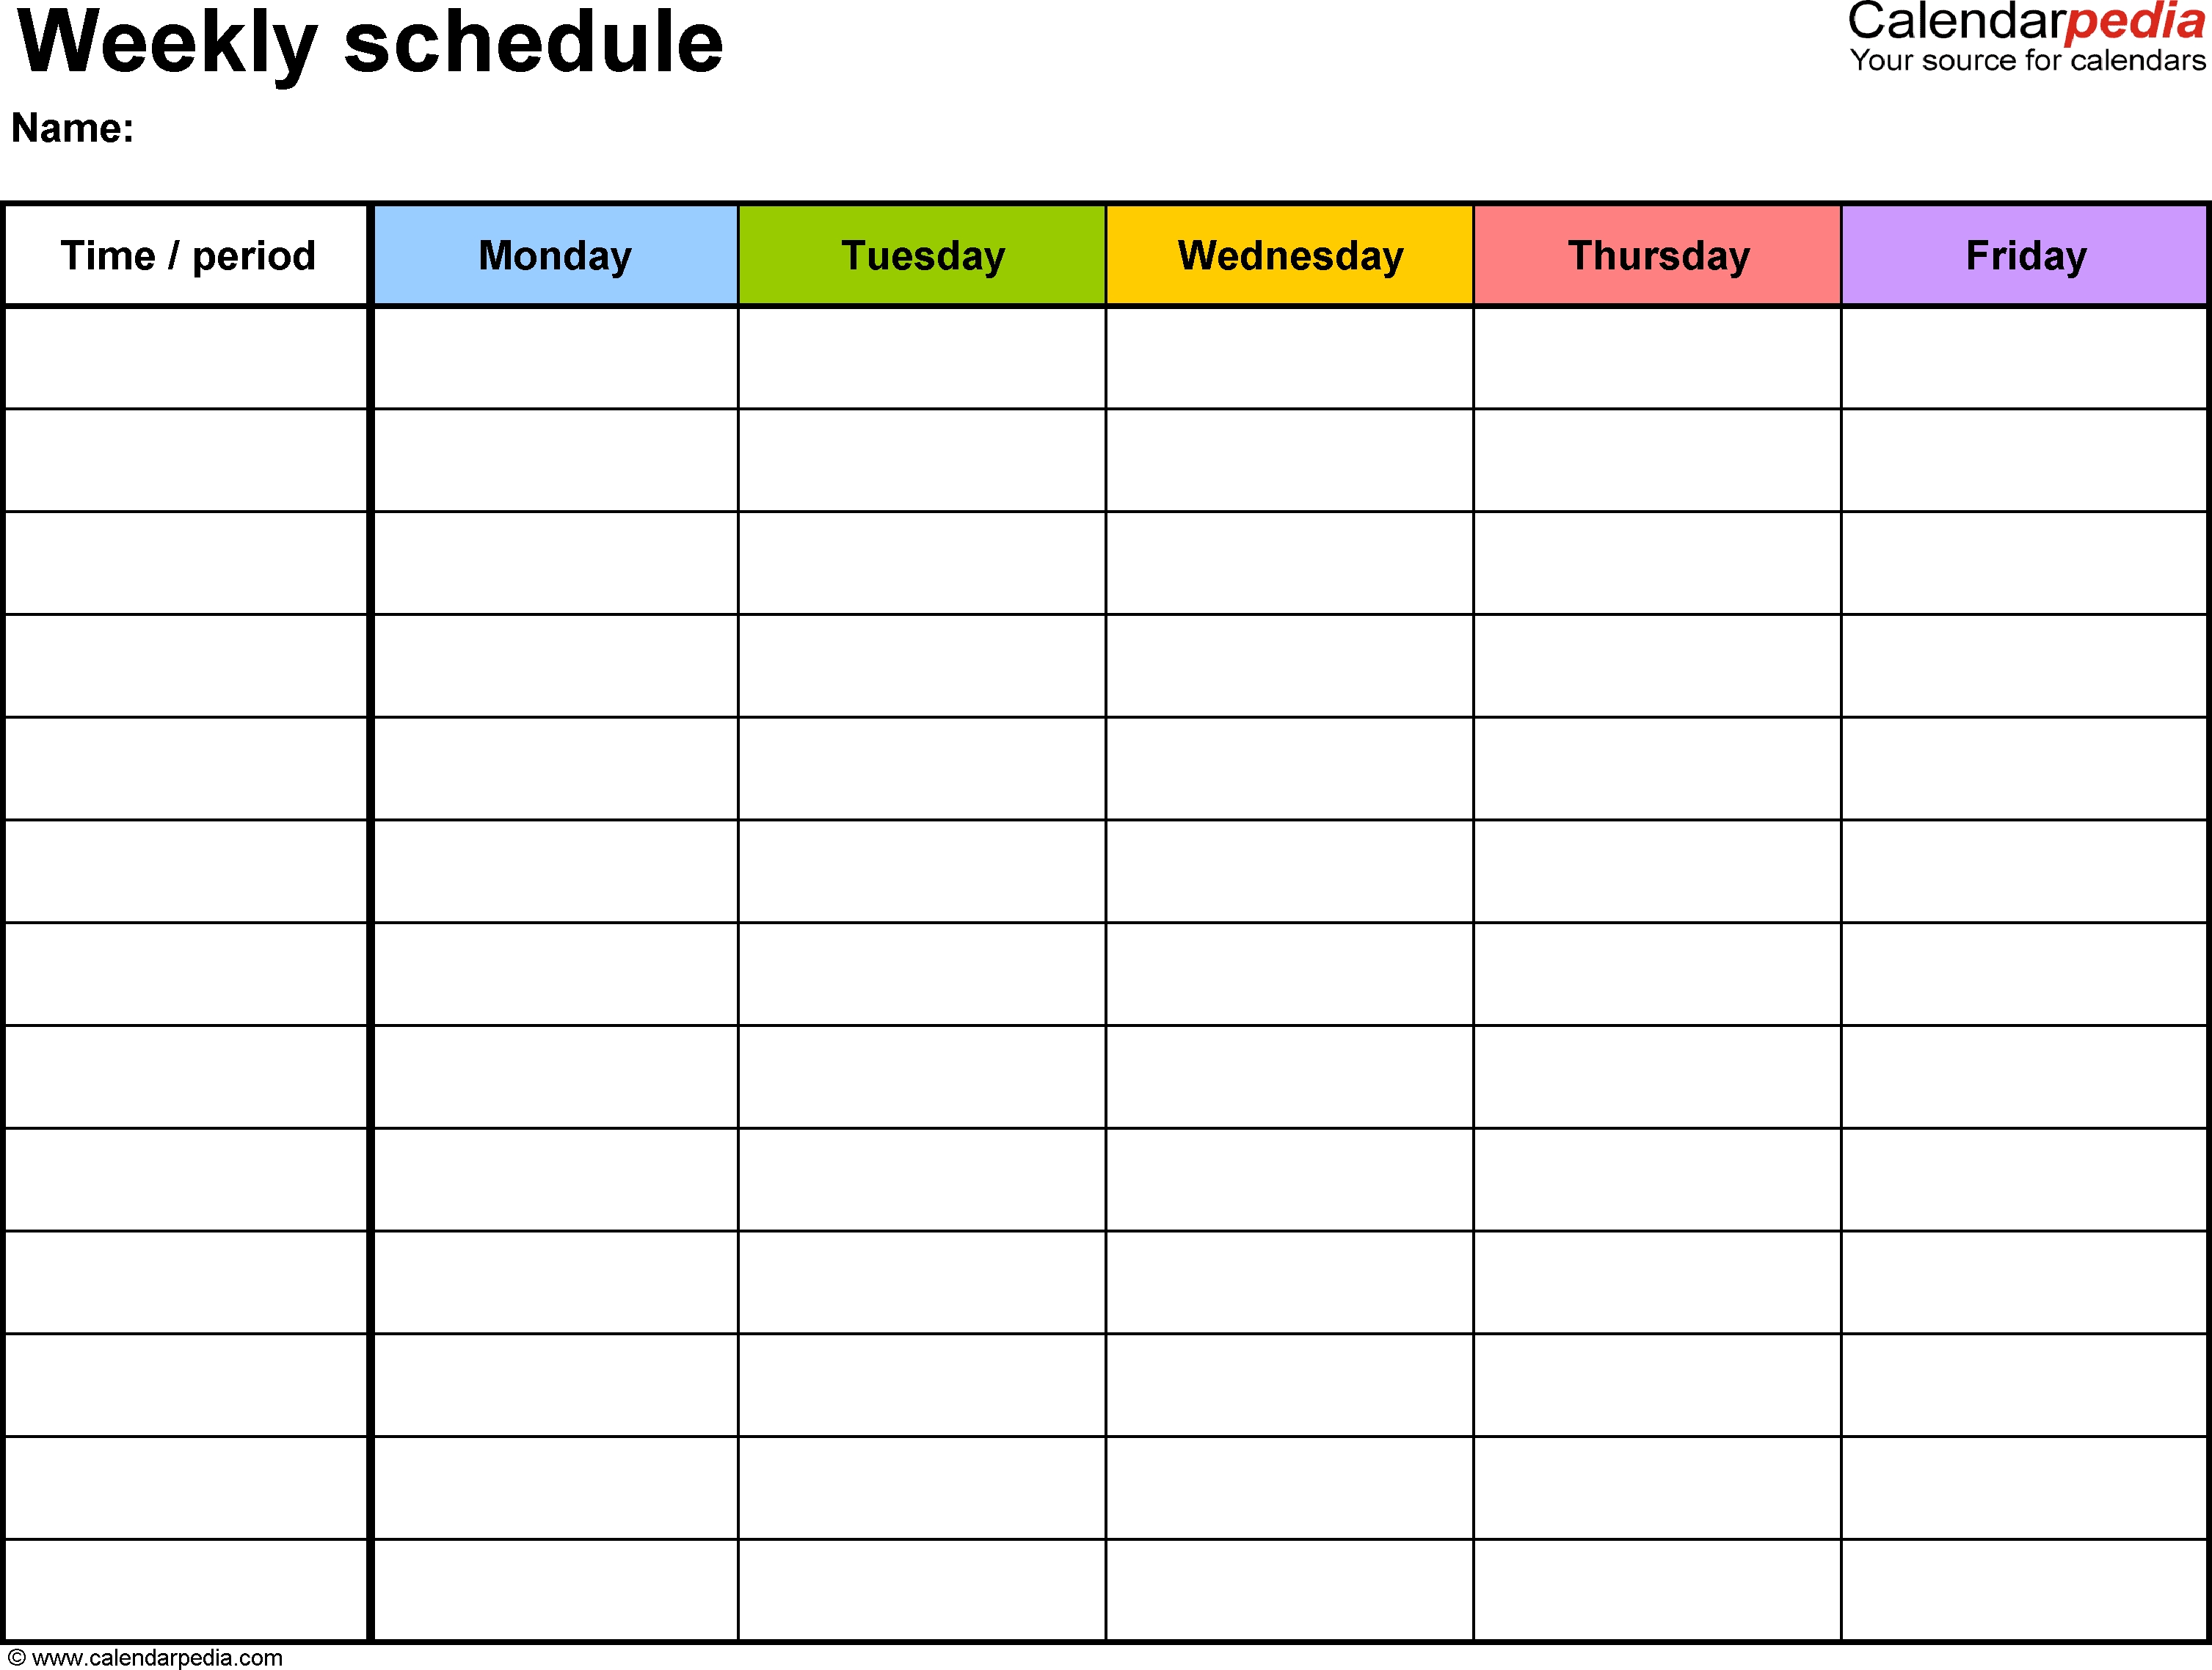 Free Weekly Schedule Templates For Word - 18 Templates  Fill In Blank Weekly Calendar Templates